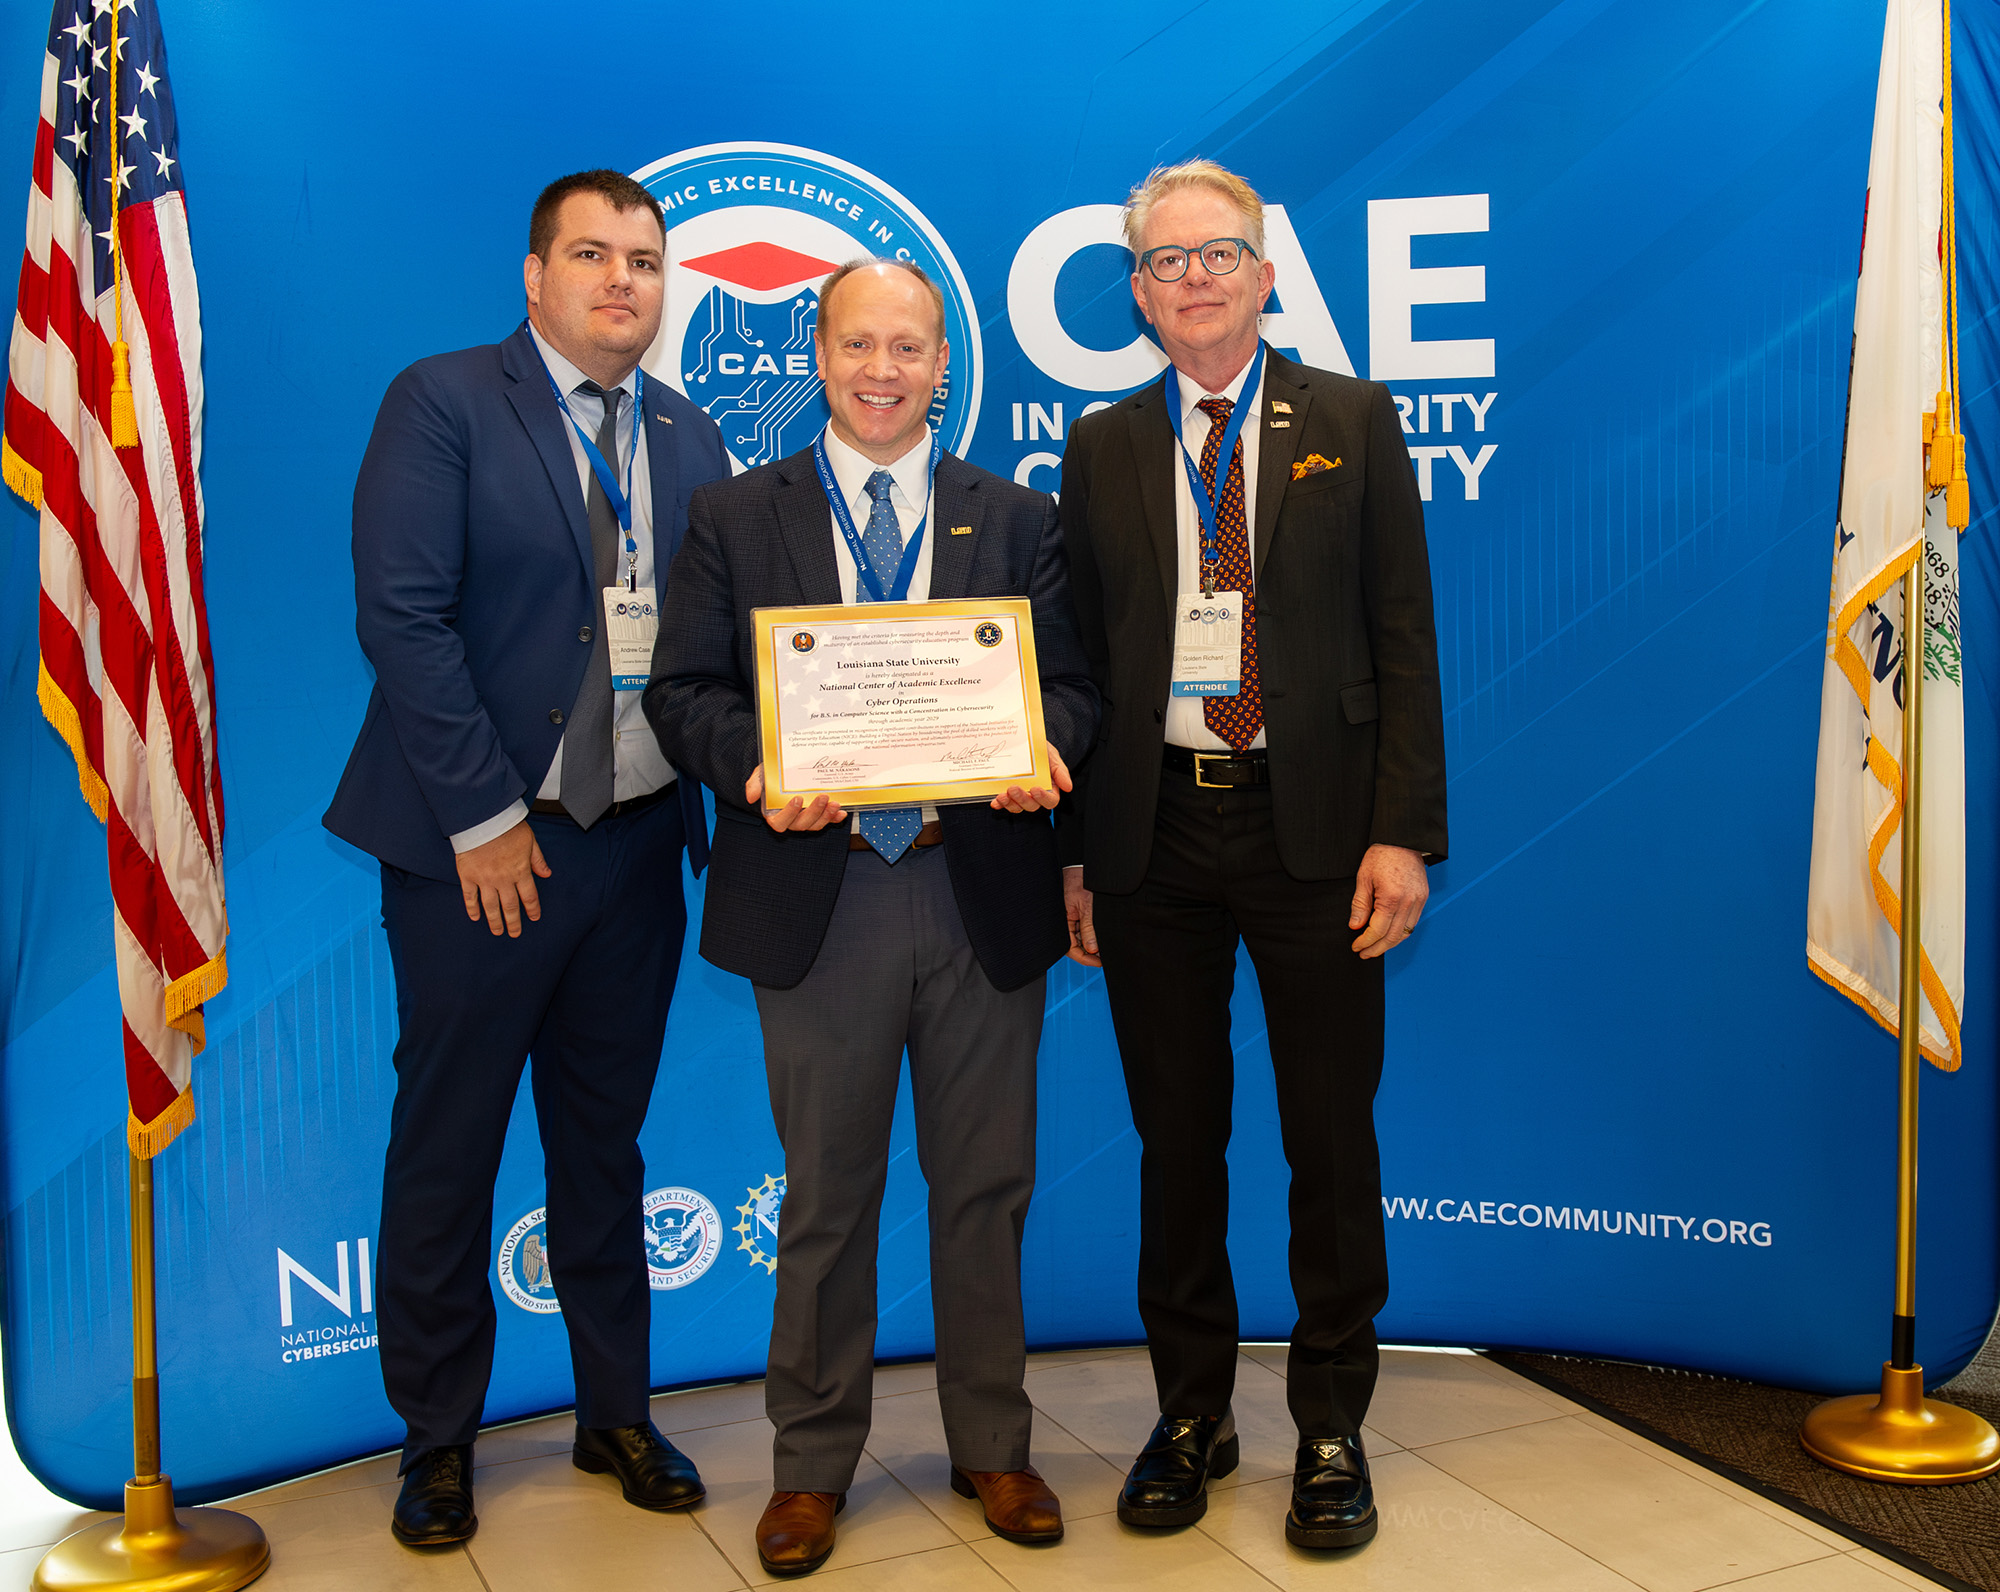 Andrew Case, Greg Trahan, and Golden Richard with certificate designating LSU as a Center of Academic Excellence in Cyber Operations